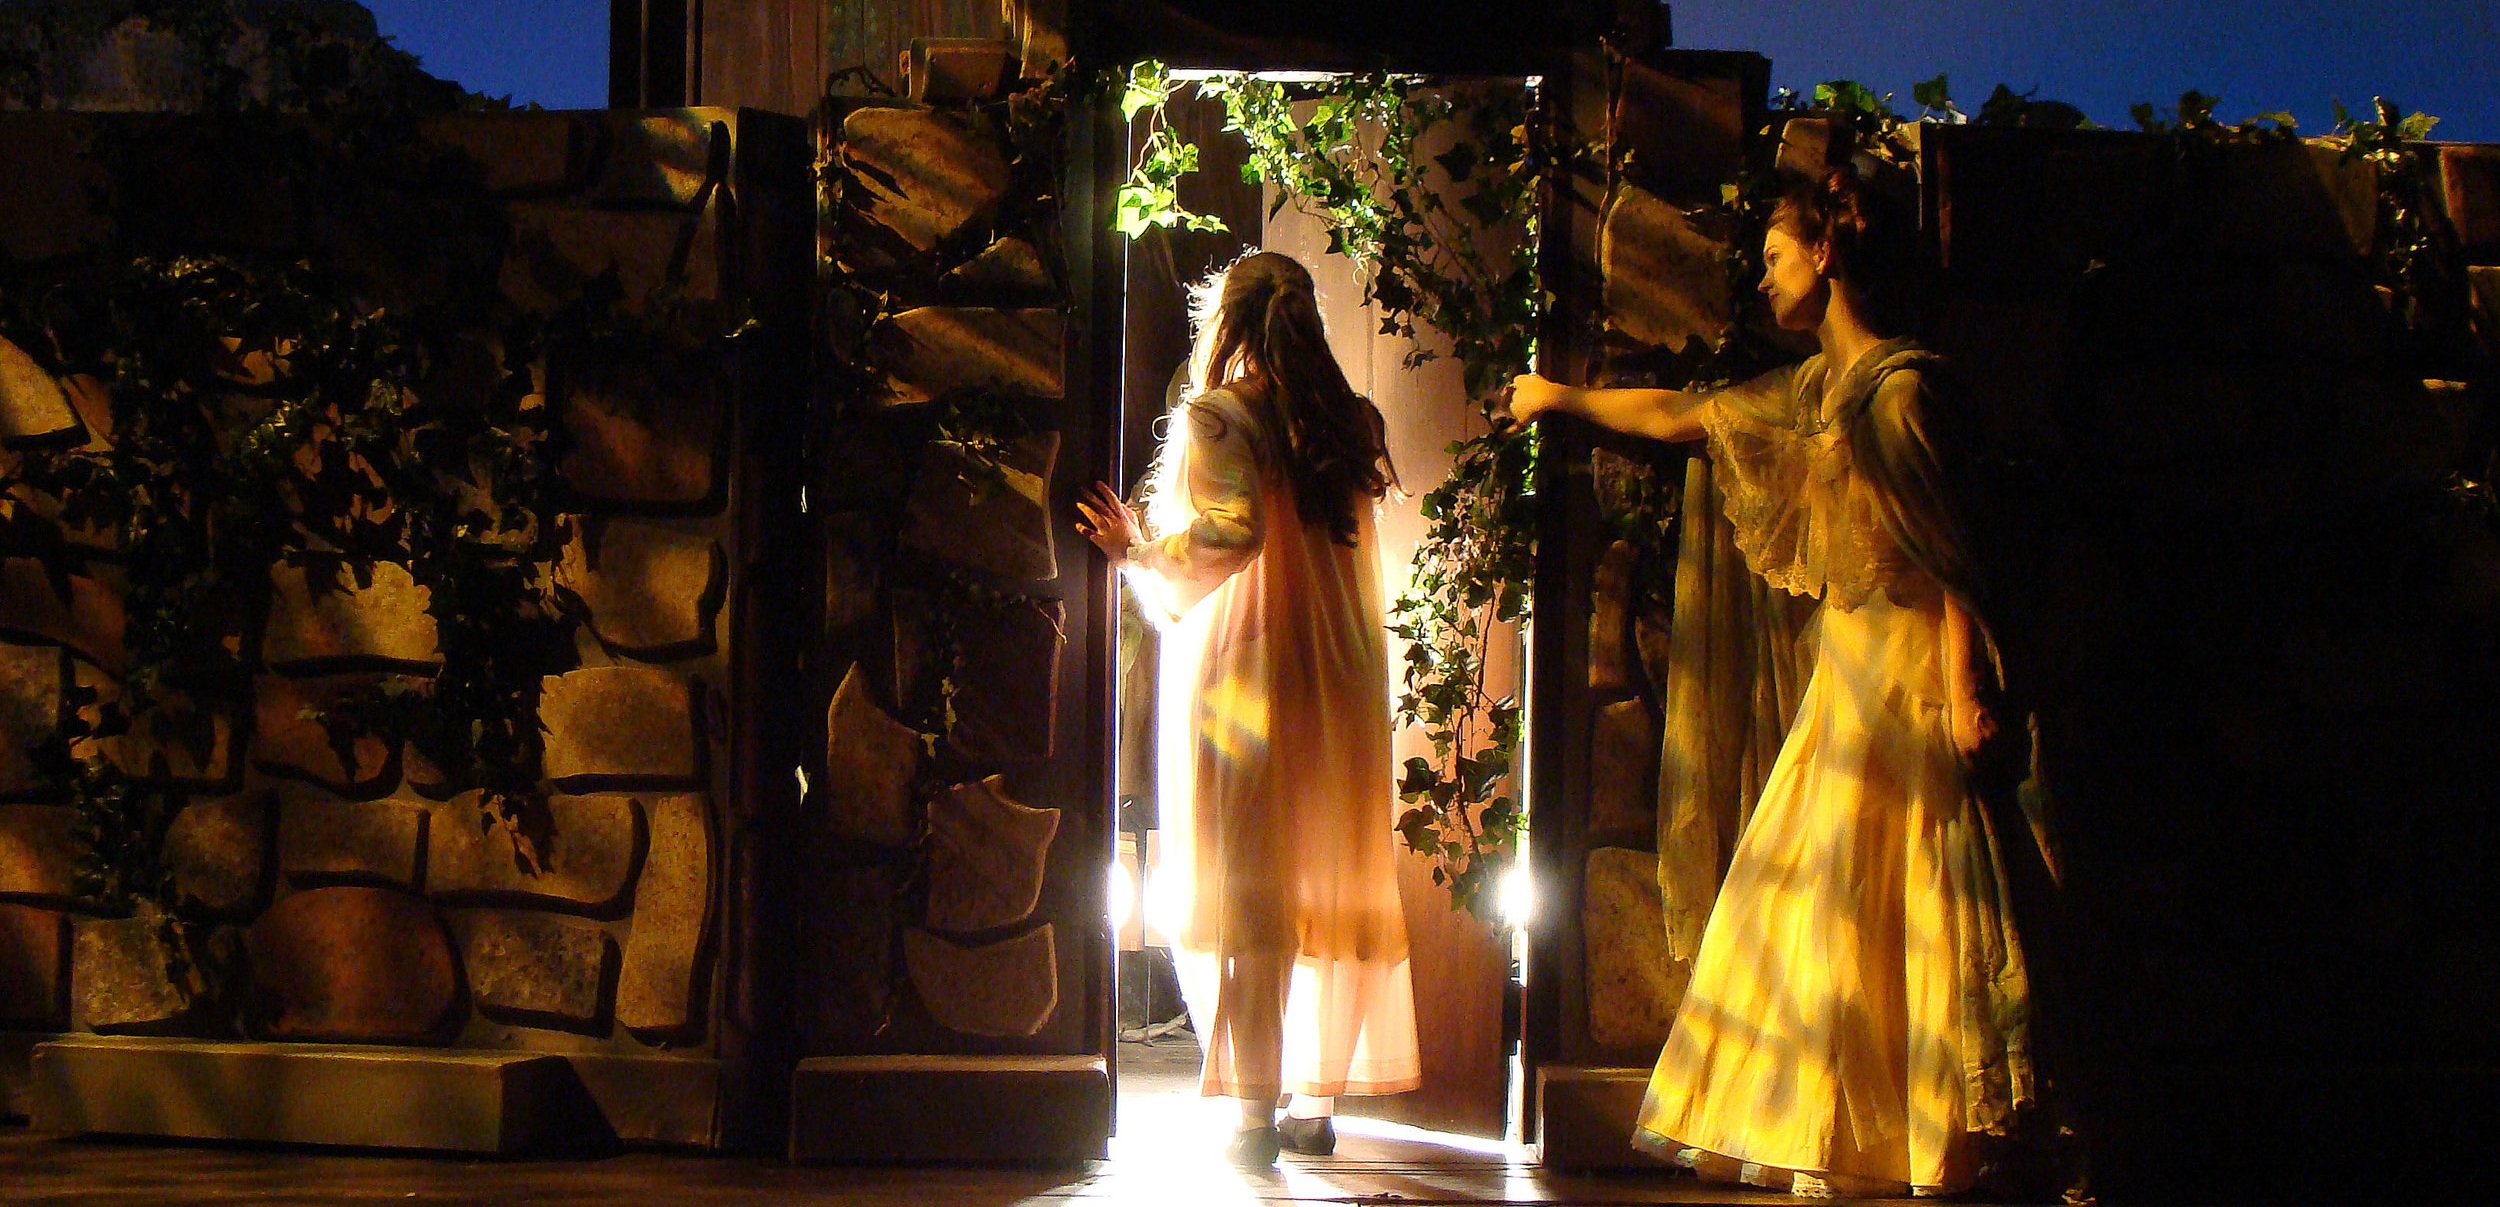   Abigail Stokley  and  Sara Black  in Sinfonicron Light Opera Company’s production of  The Secret Garden , Directed by  Dan Plehal .  